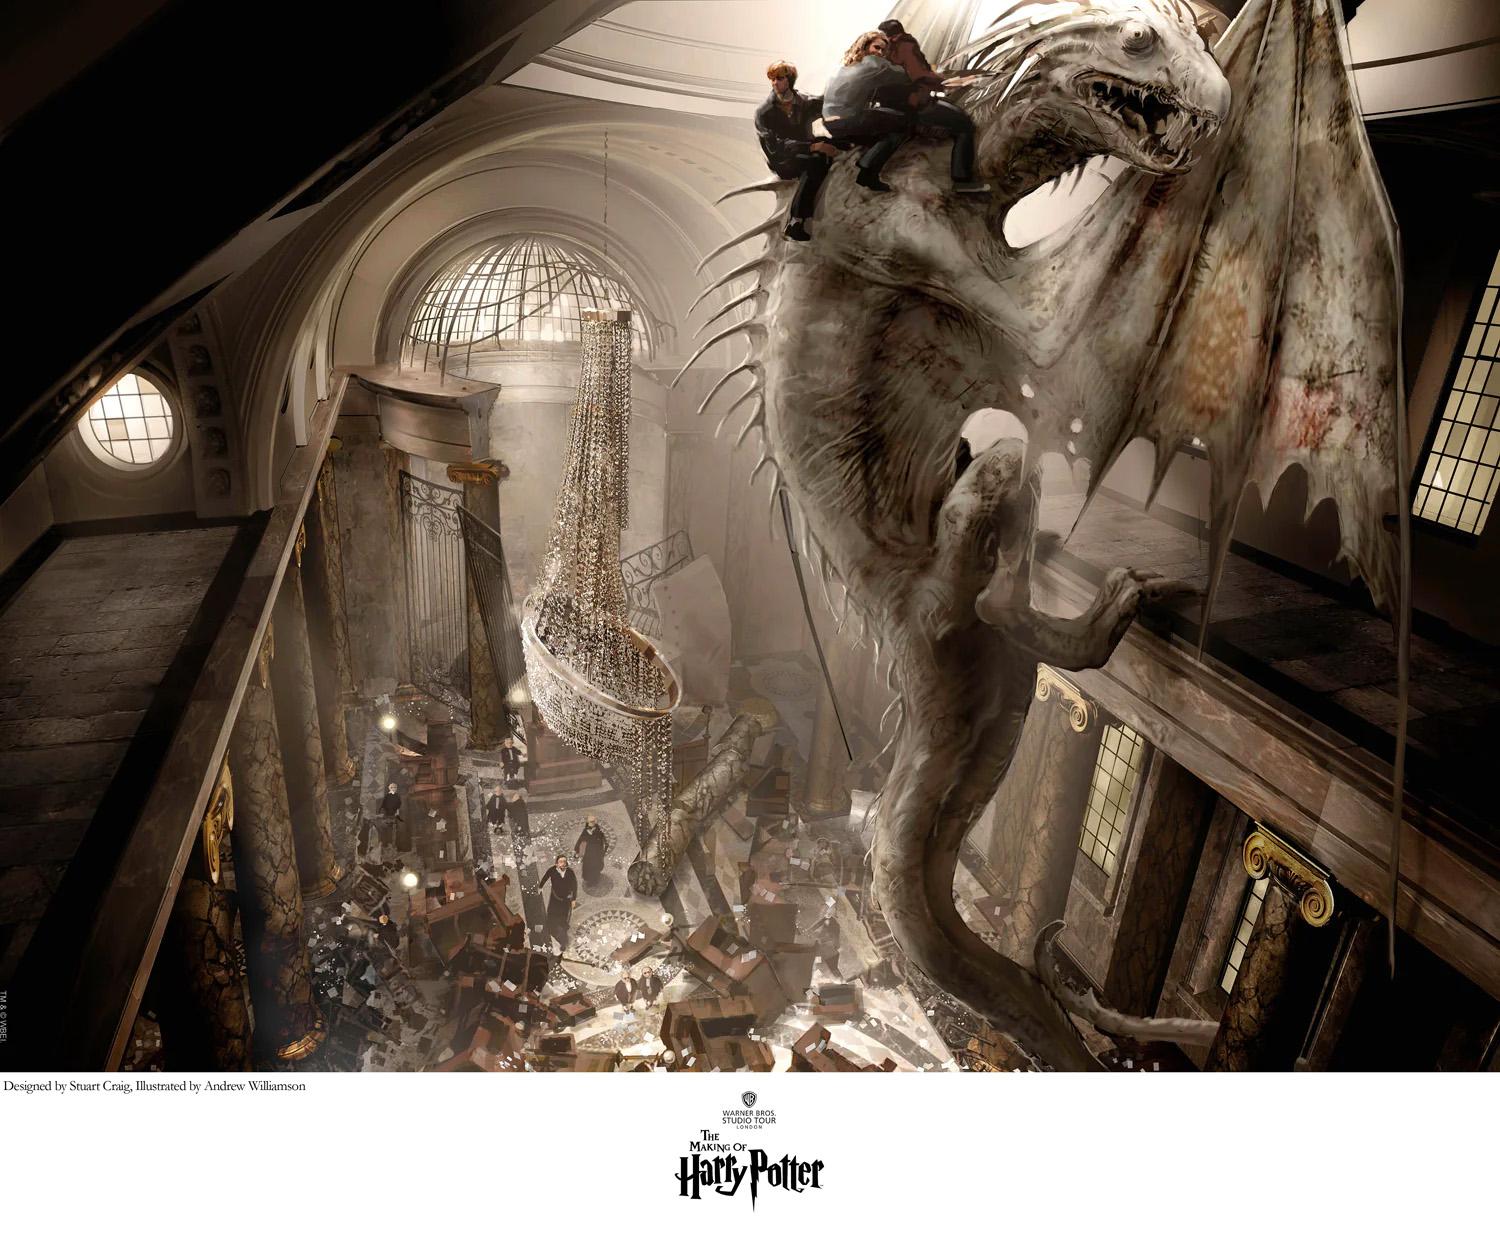 MEDIUM: Gicleé on Fine Art Paper
EDITION SIZE: 500
SIZE: 12.5" x 18"
SIGNED BY: Stuart Craig
SKU: CP1498

ABOUT THE IMAGE:  Over a decade ago, world-renowned writer, J.K. Rowling created the world of Harry Potter, capturing the imaginations of